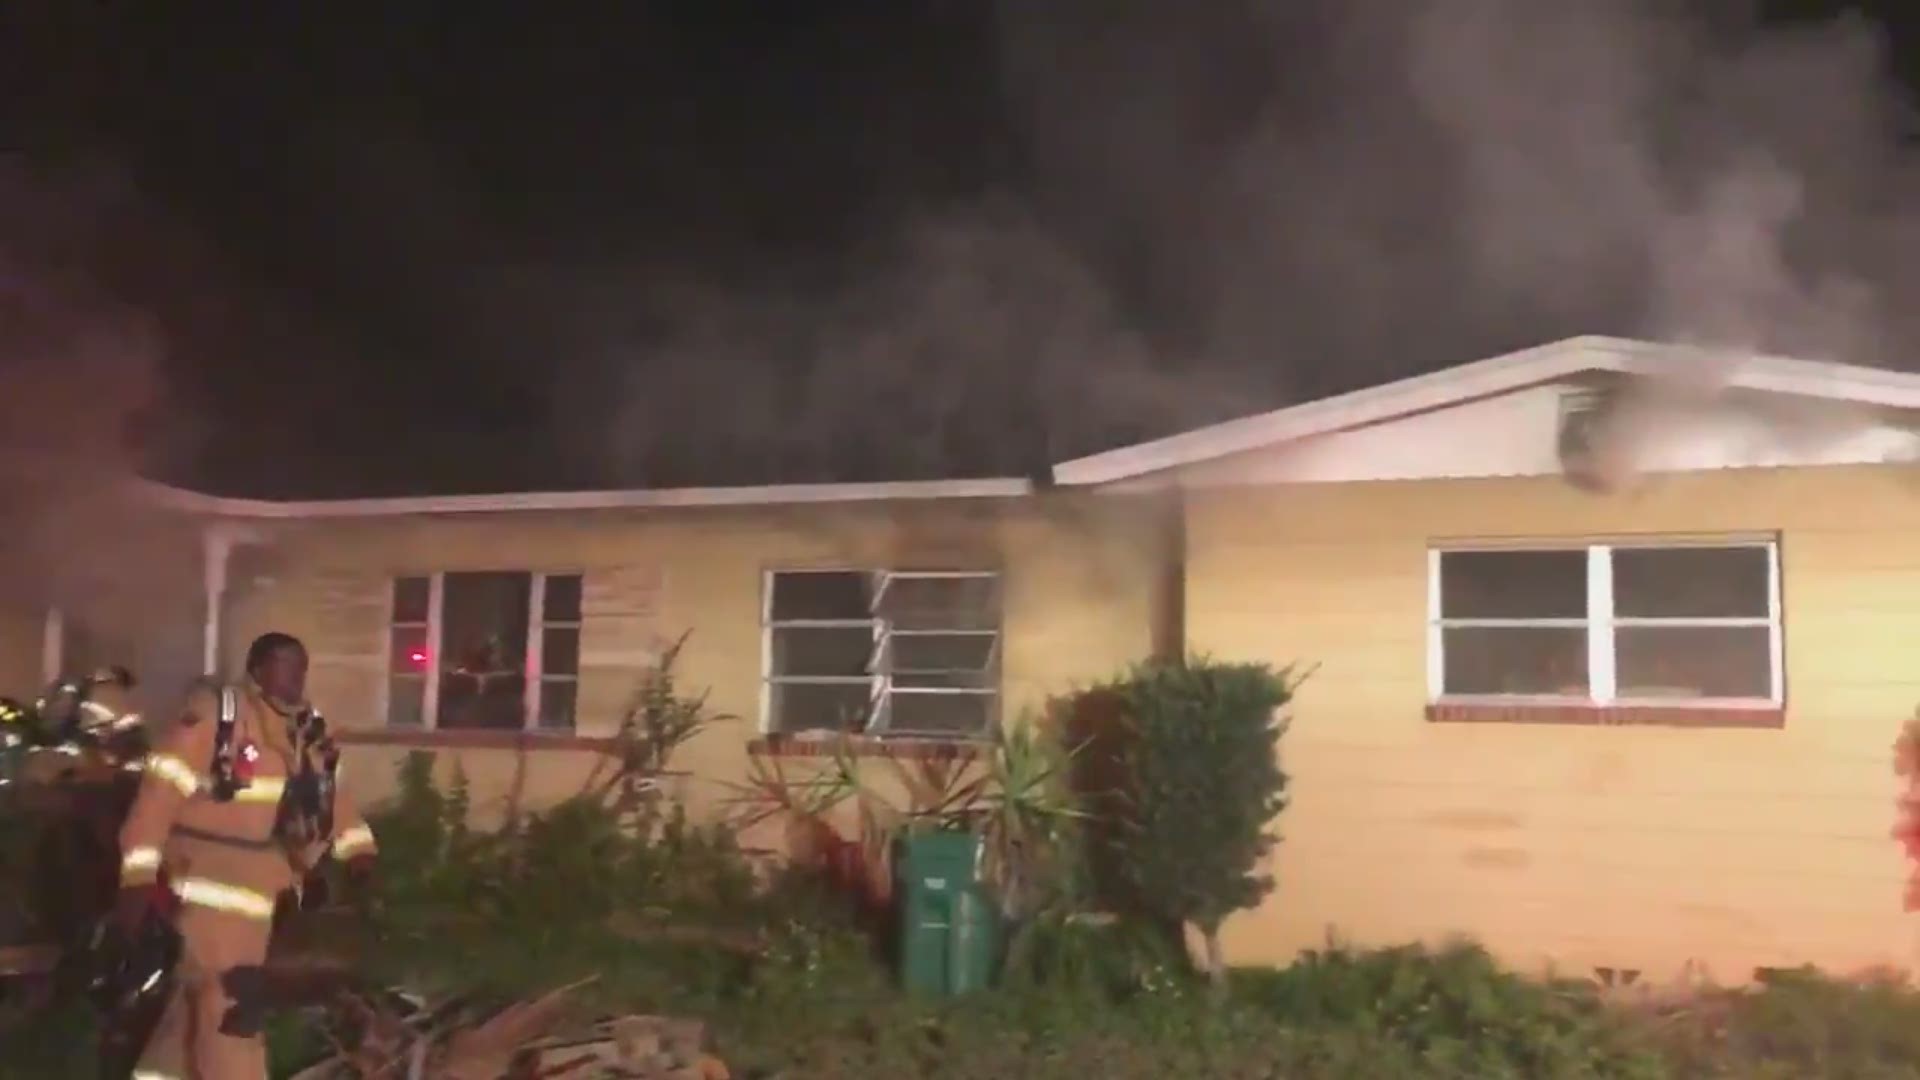 One person was found dead in a house fire Saturday night in Jacksonville Beach, according to the Jacksonville Beach Fire Department (JBFD).